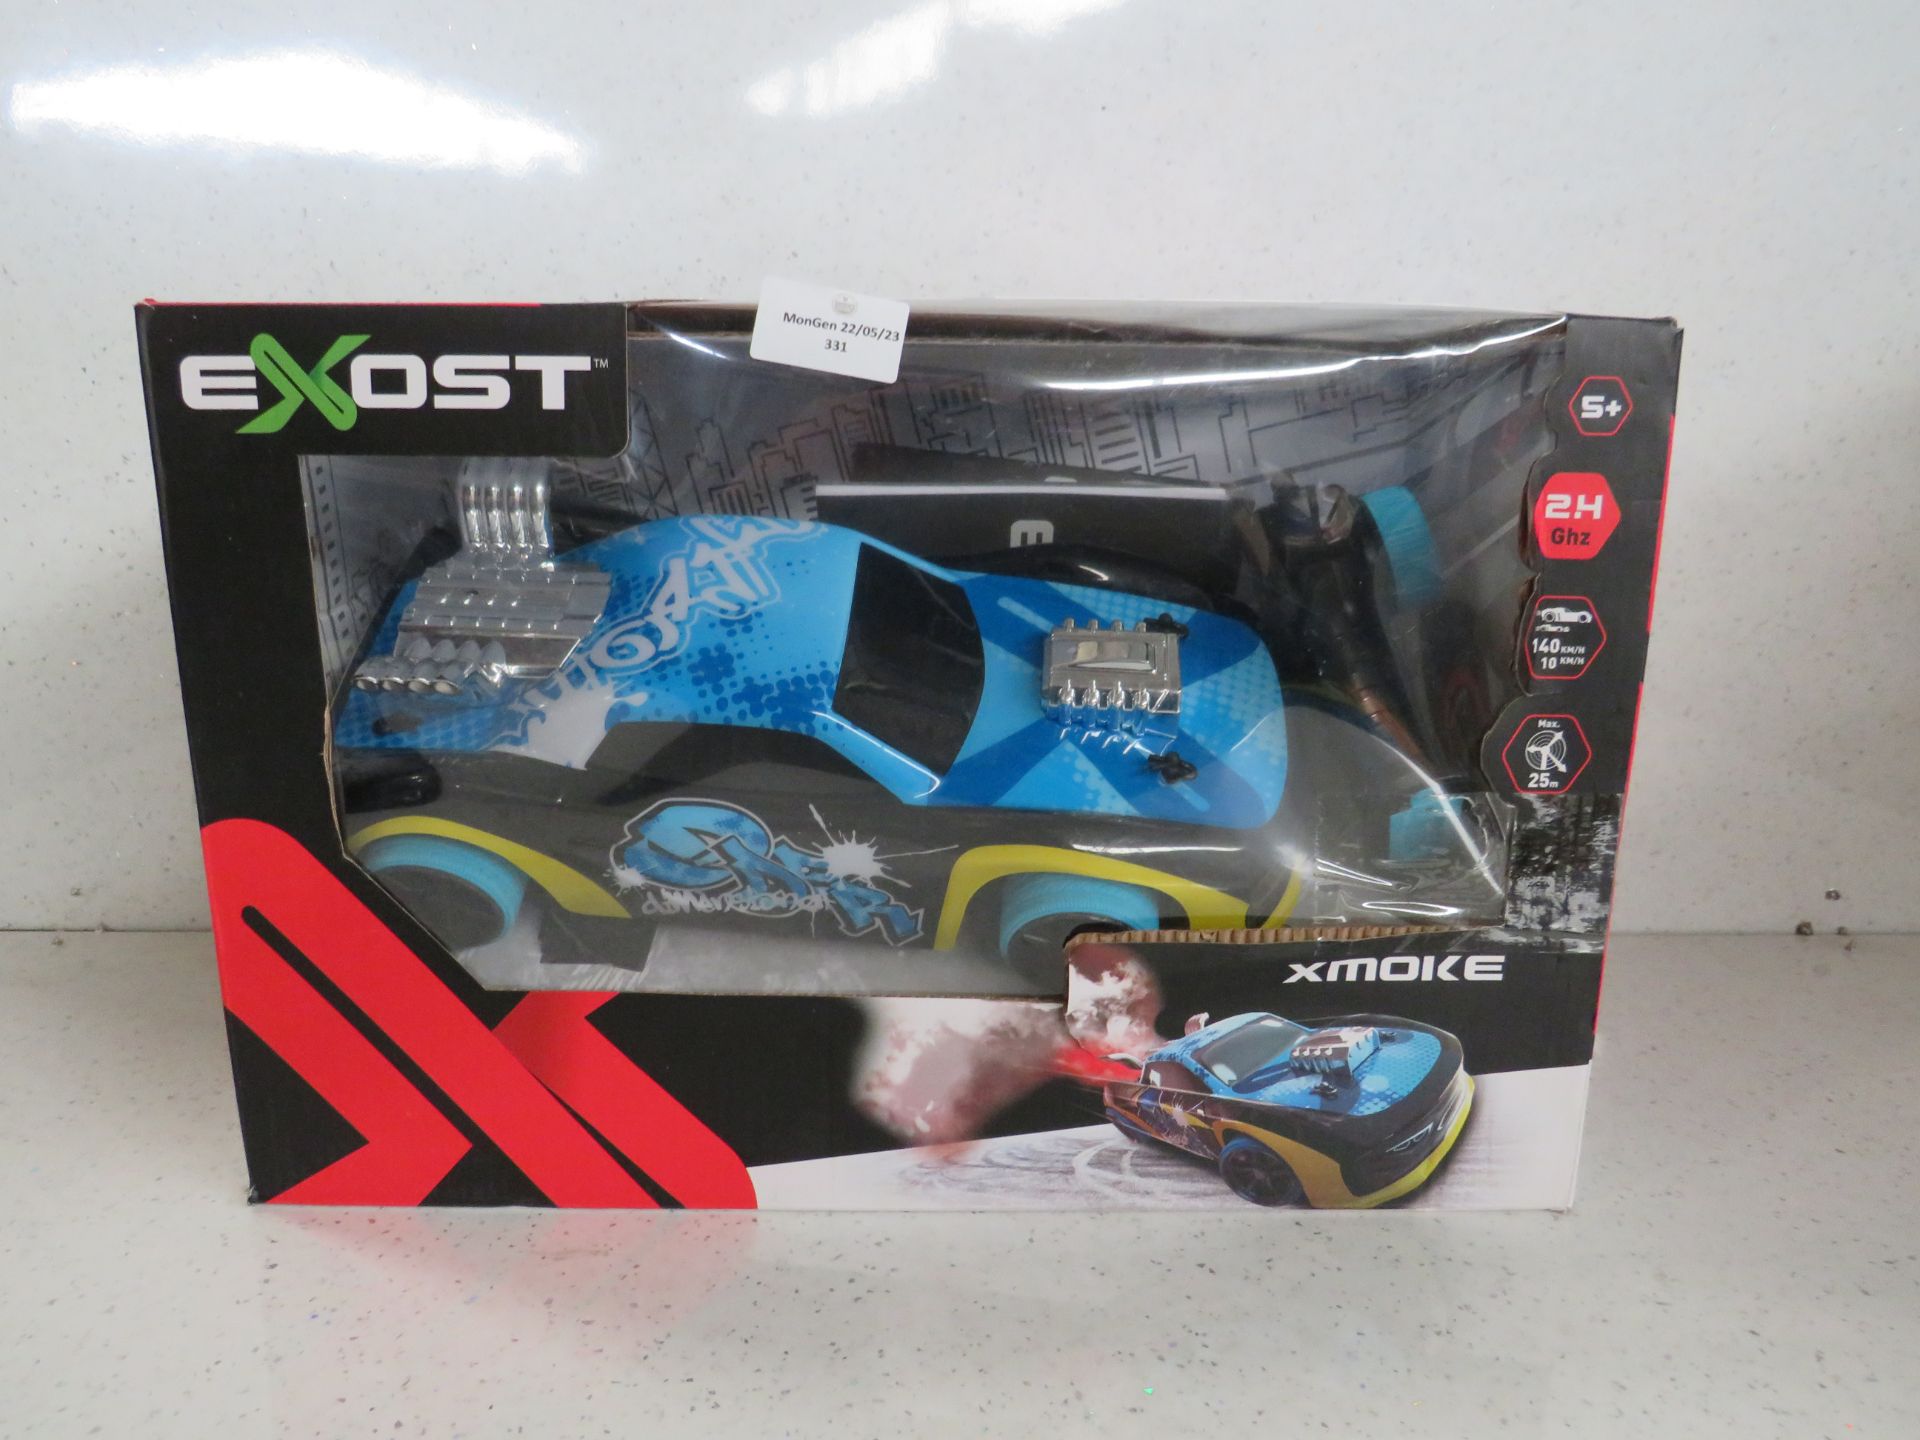 Exost - Xmoke R/C Car - Unchecked & Boxed.